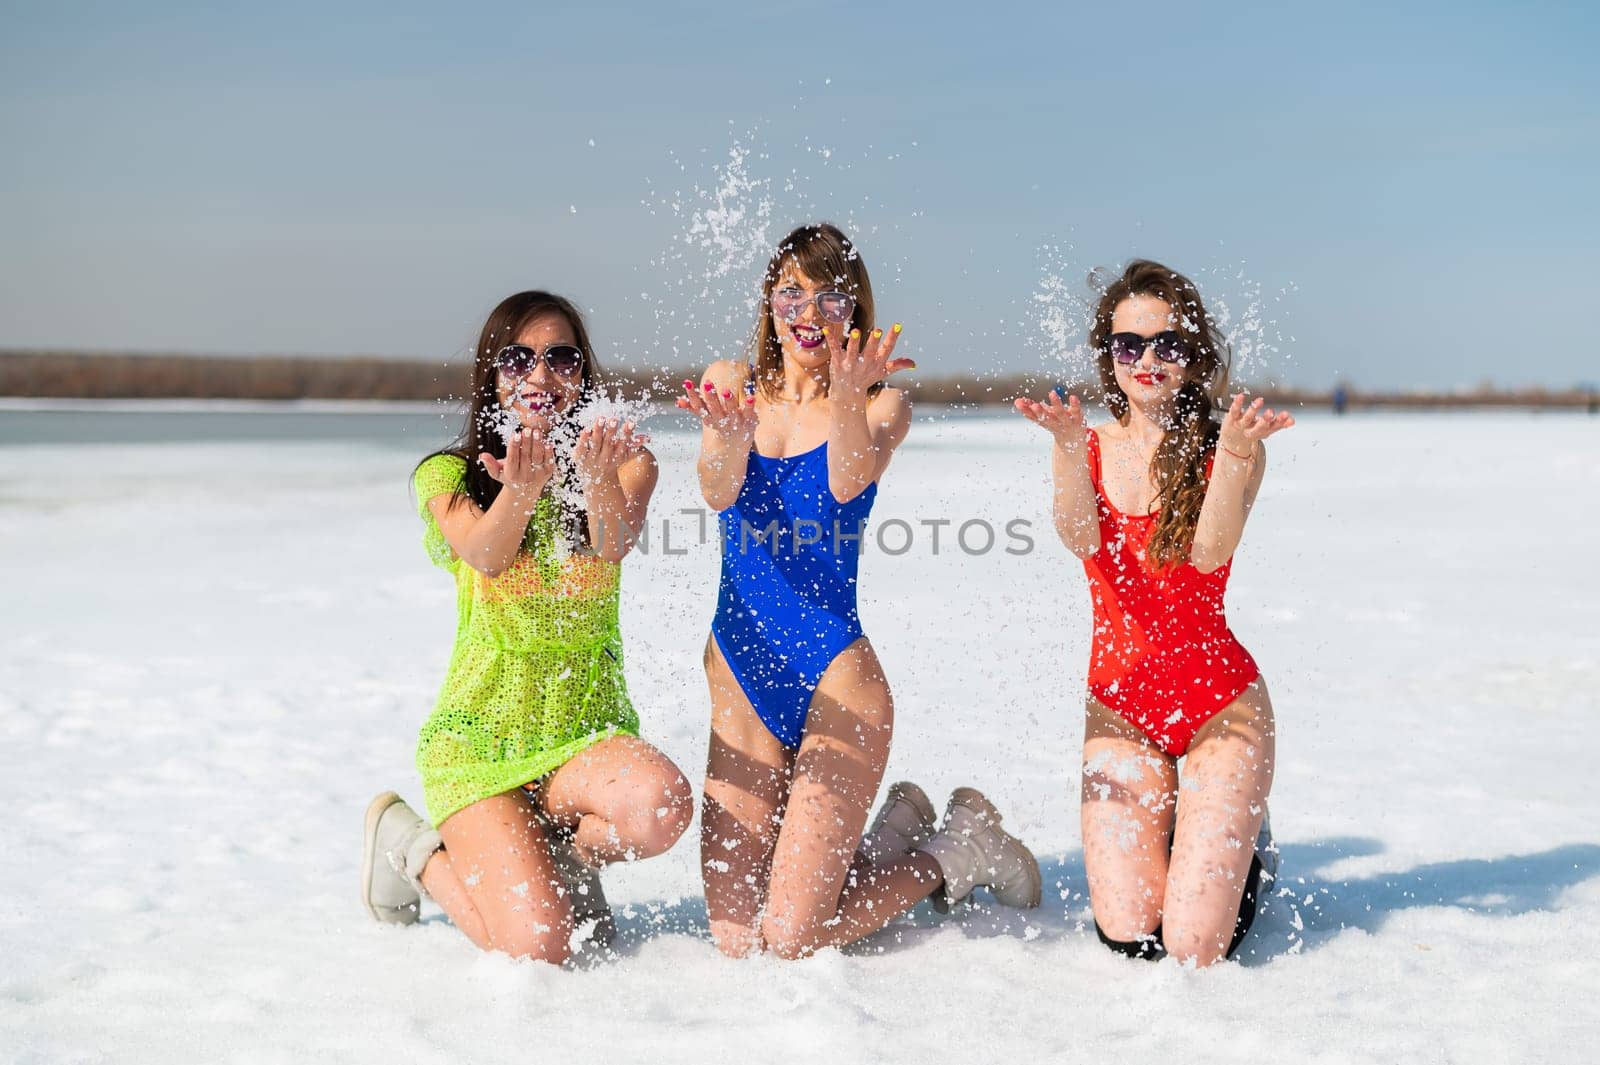 Three girlfriends in swimsuits are relaxing on a snow-covered beach. Hot girls posing in bikinis outdoors in winter. by mrwed54